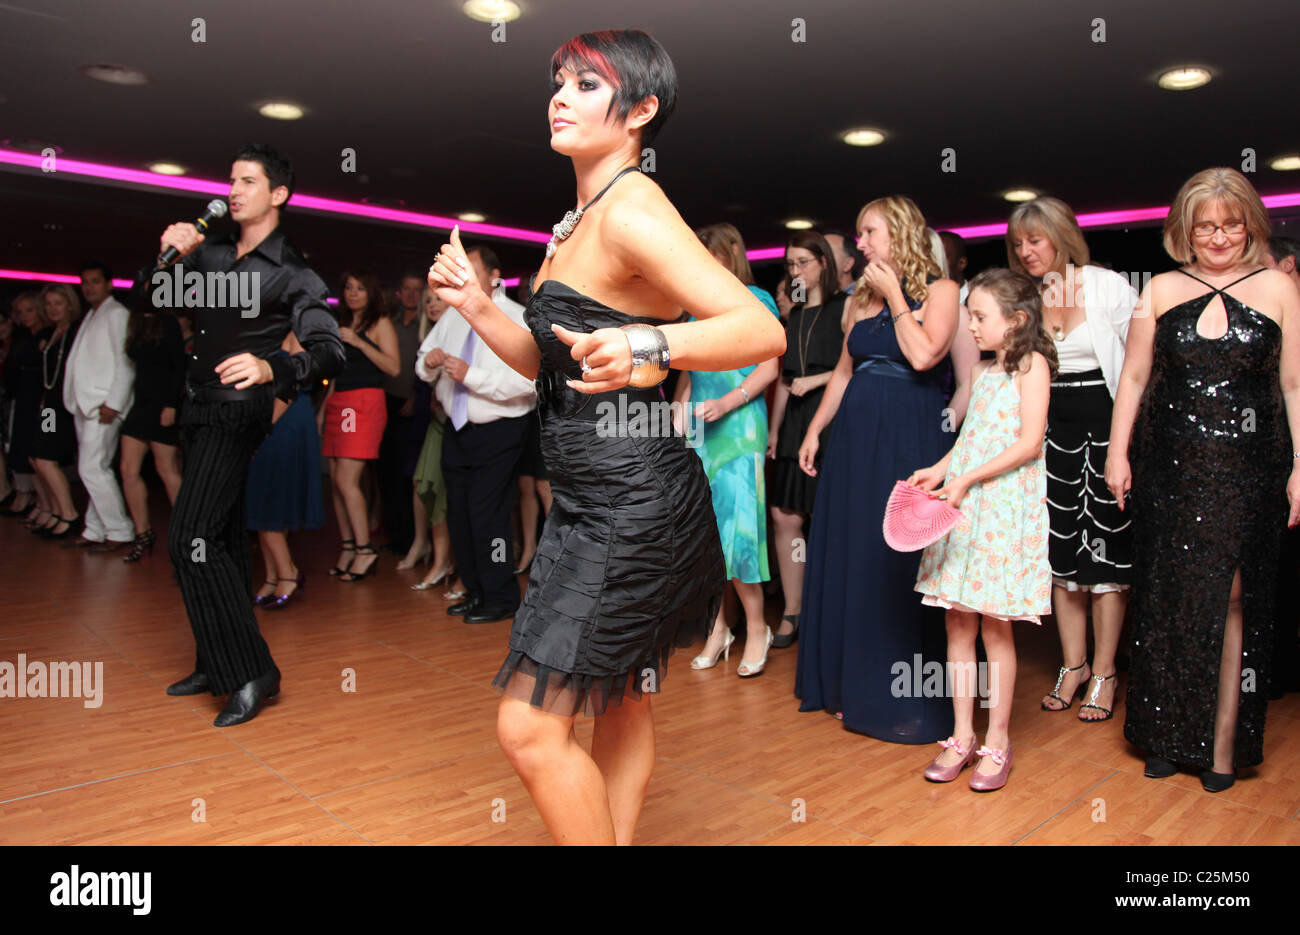 People learning to dance. Stock Photo